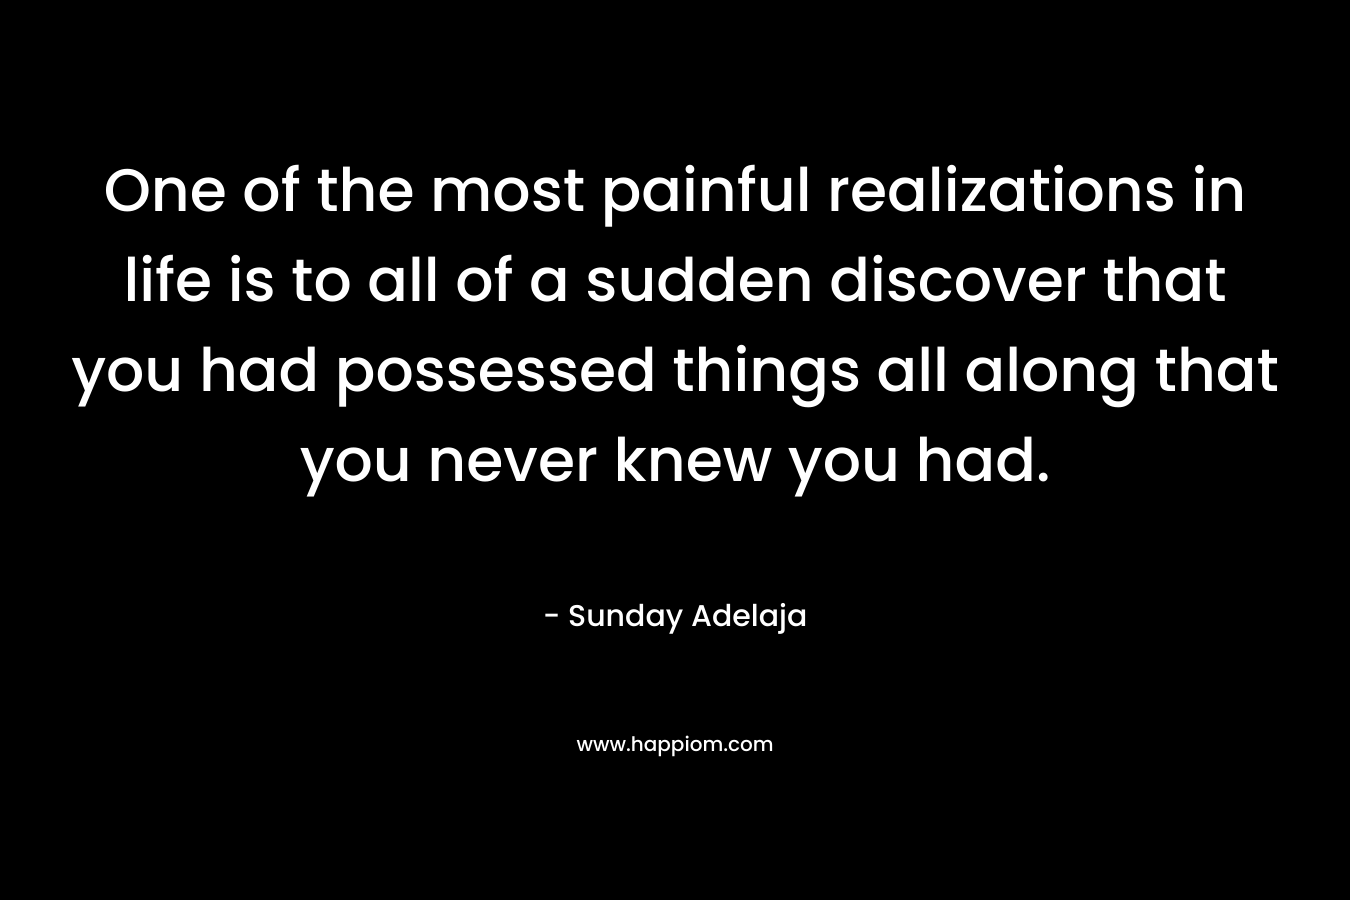 One of the most painful realizations in life is to all of a sudden discover that you had possessed things all along that you never knew you had.